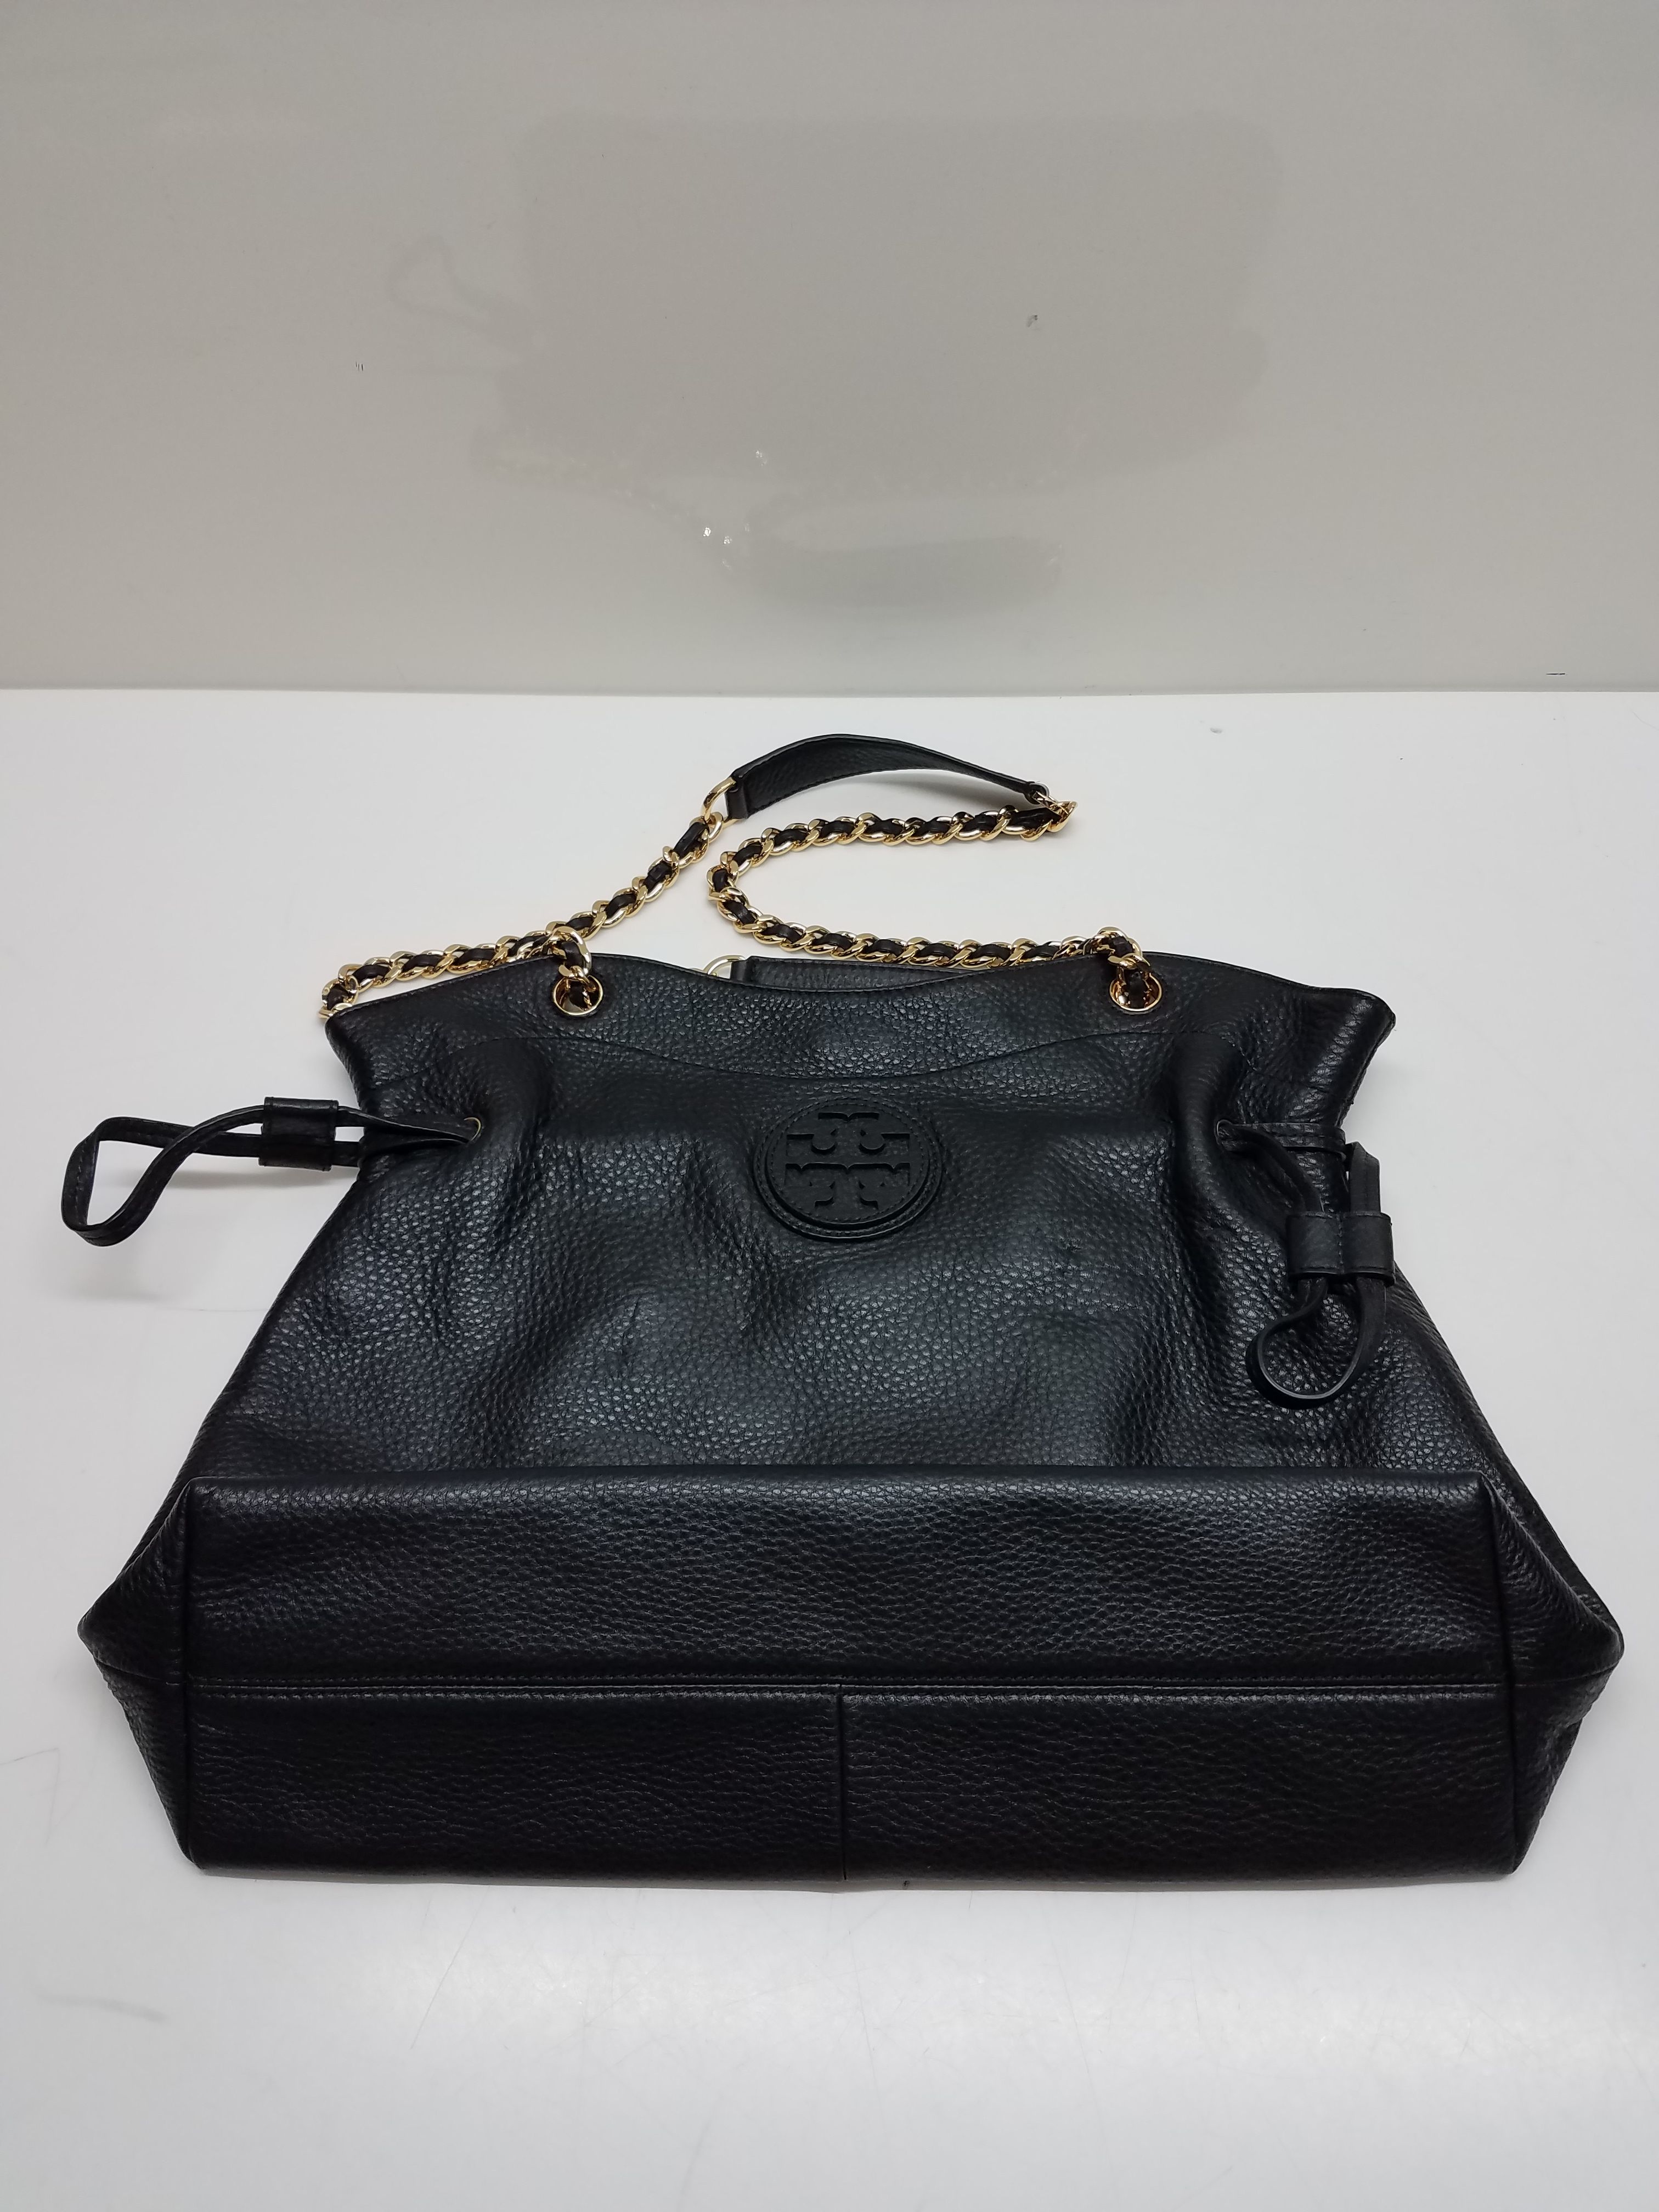 Tory Burch Marion Slouchy Tote Leather Bag Chain/ Woven Leather Strap Black